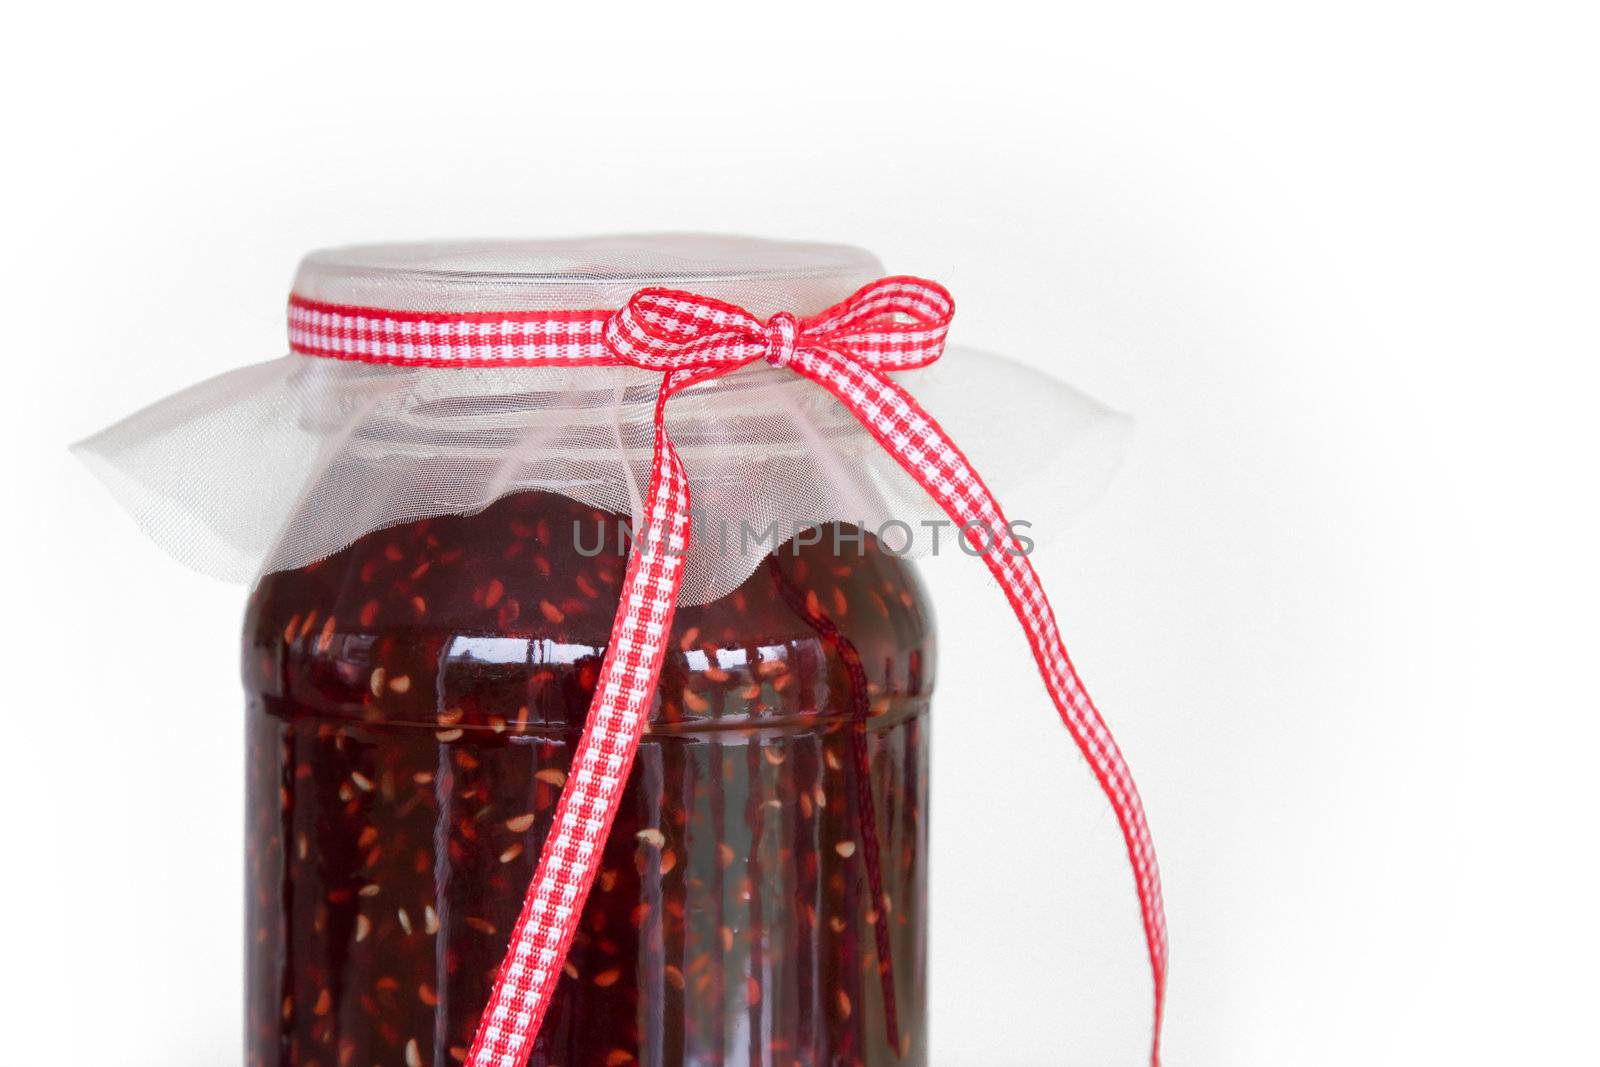 Jar of home made raspberry jam tied with a gingham ribbon